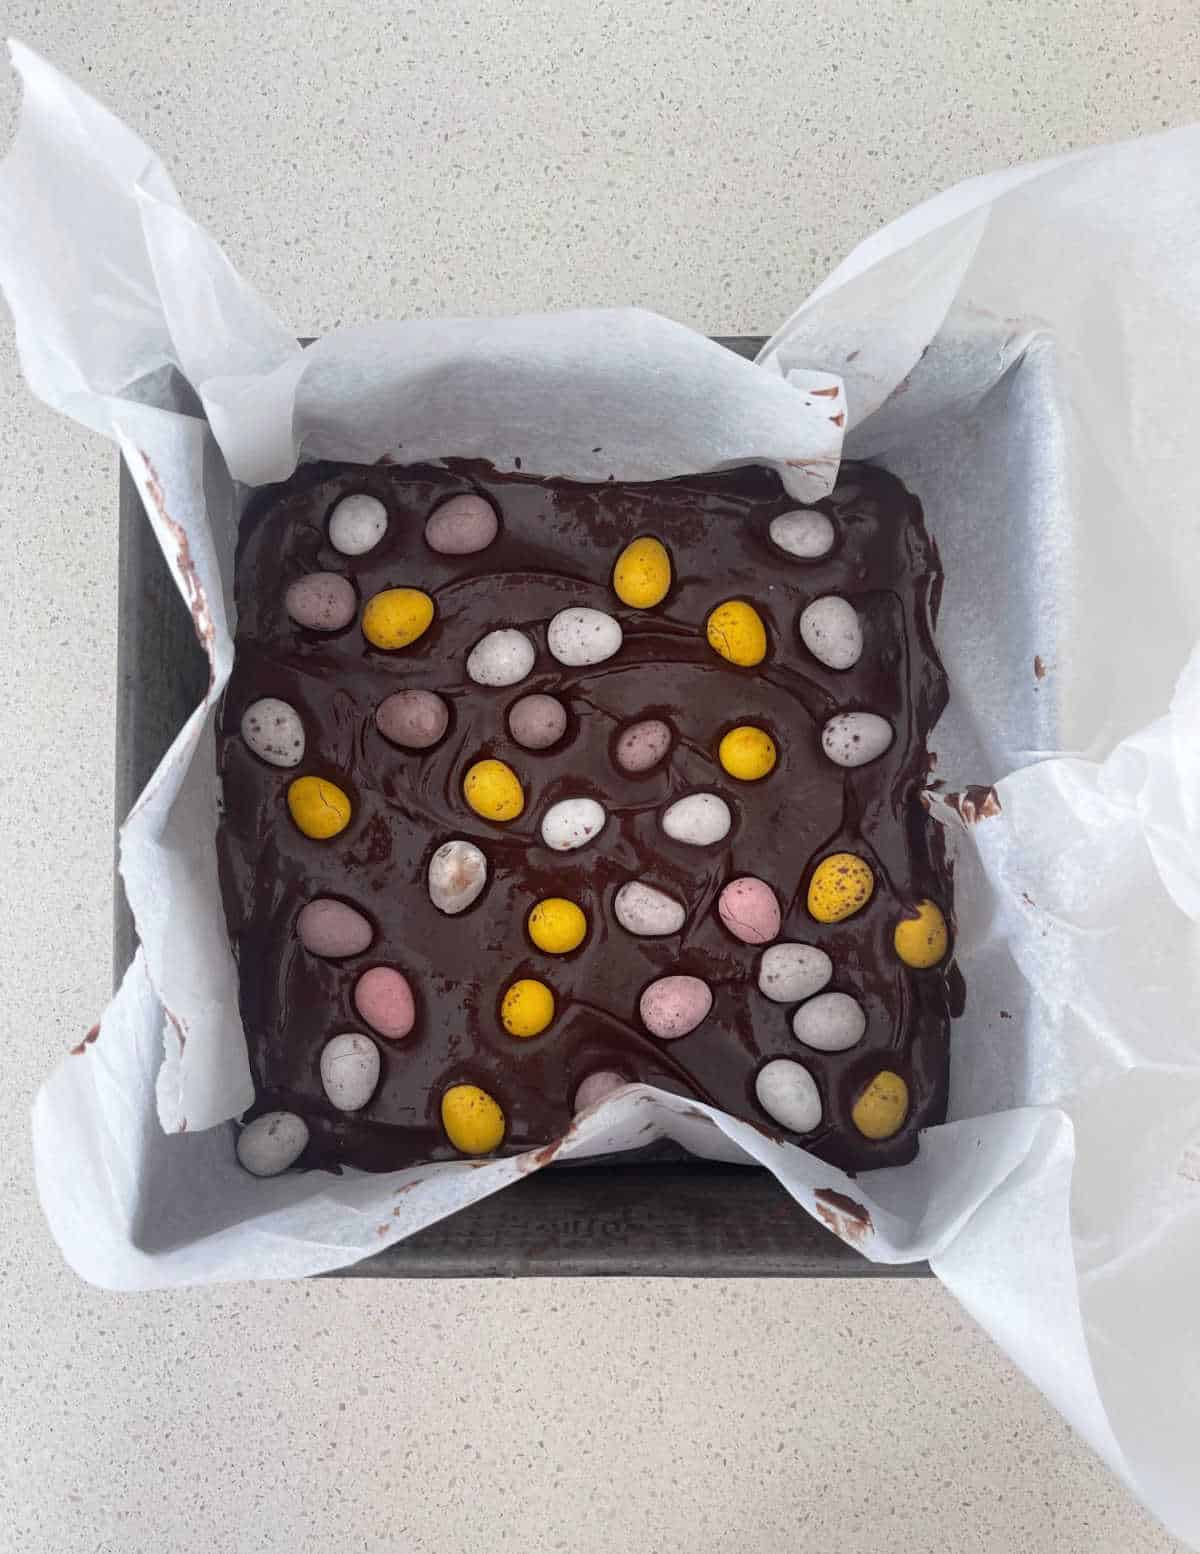 Easter egg brownie mixture in a baking tin ready to go into the oven.